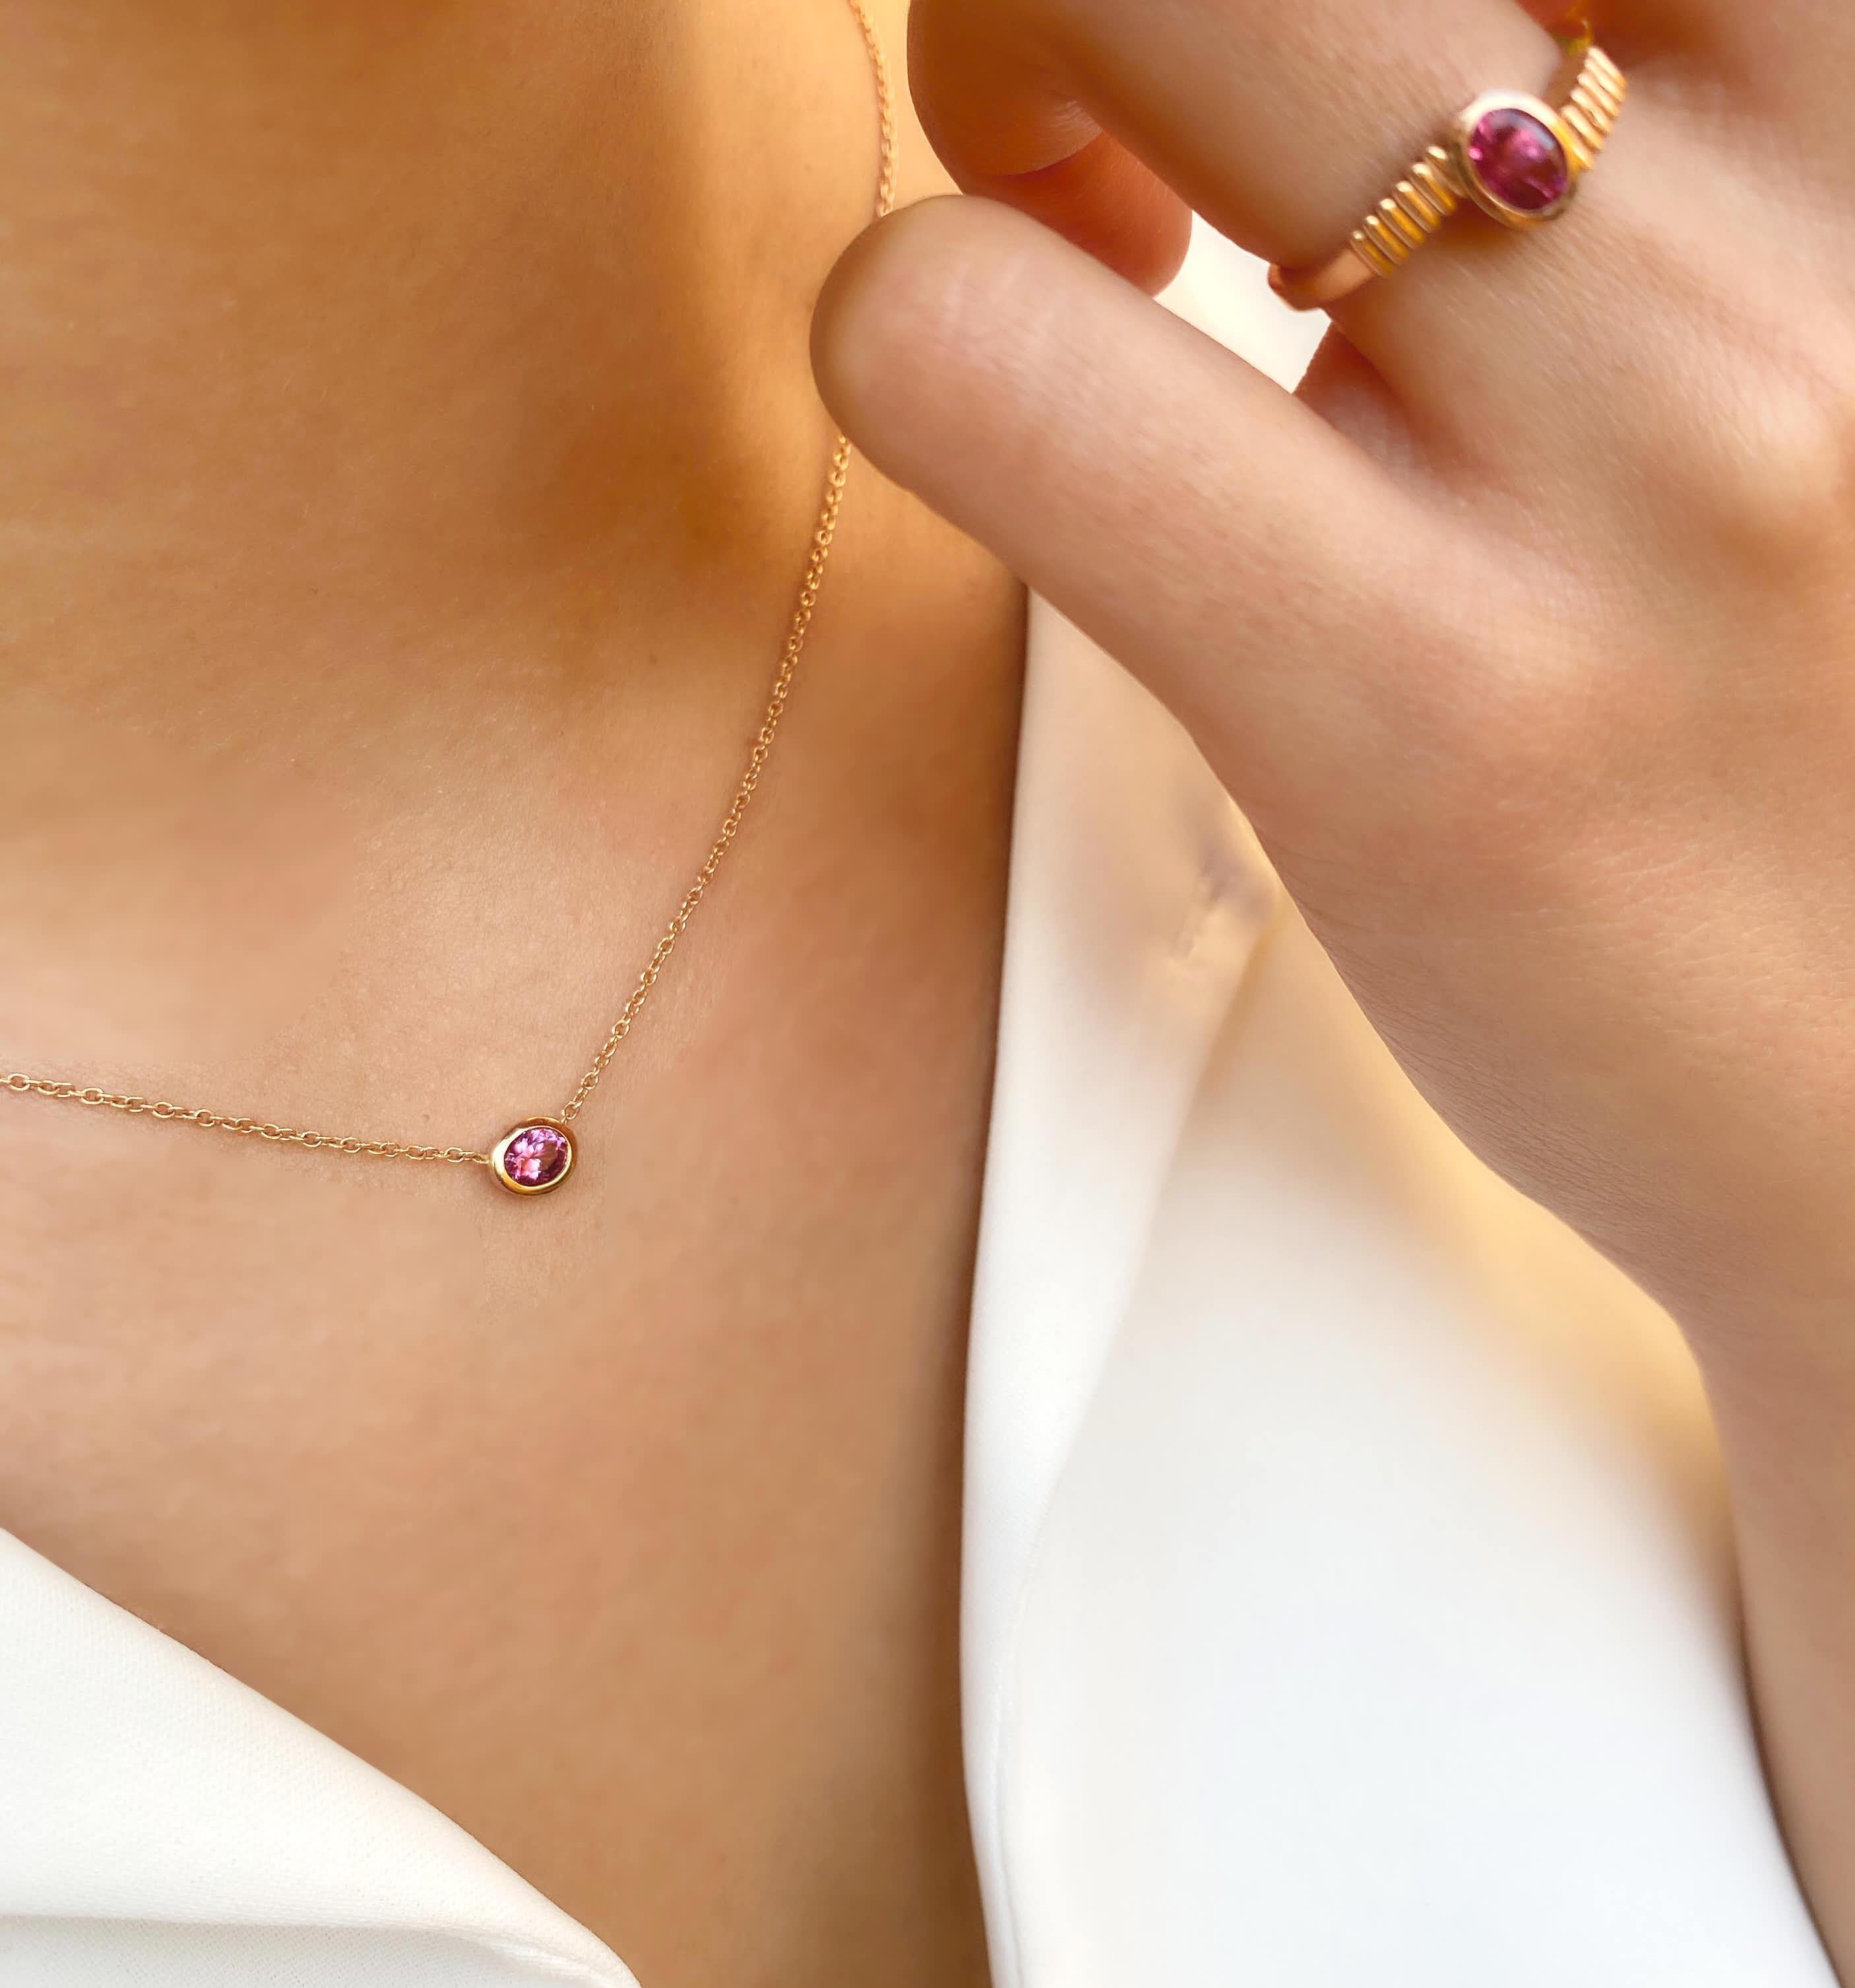 •	18 Karat Recycled Gold 
•	42 cm chain with an extension
��•	Pink sapphire 6×5 mm oval cut
•	Available in Rose Gold
•	Origin: Ceylon mine, Sri Lanka
•	Hand-made in Spain
•	Bespoke: Yellow, White and Rose Gold
•	Bespoke take 3-4 weeks to handcraft and